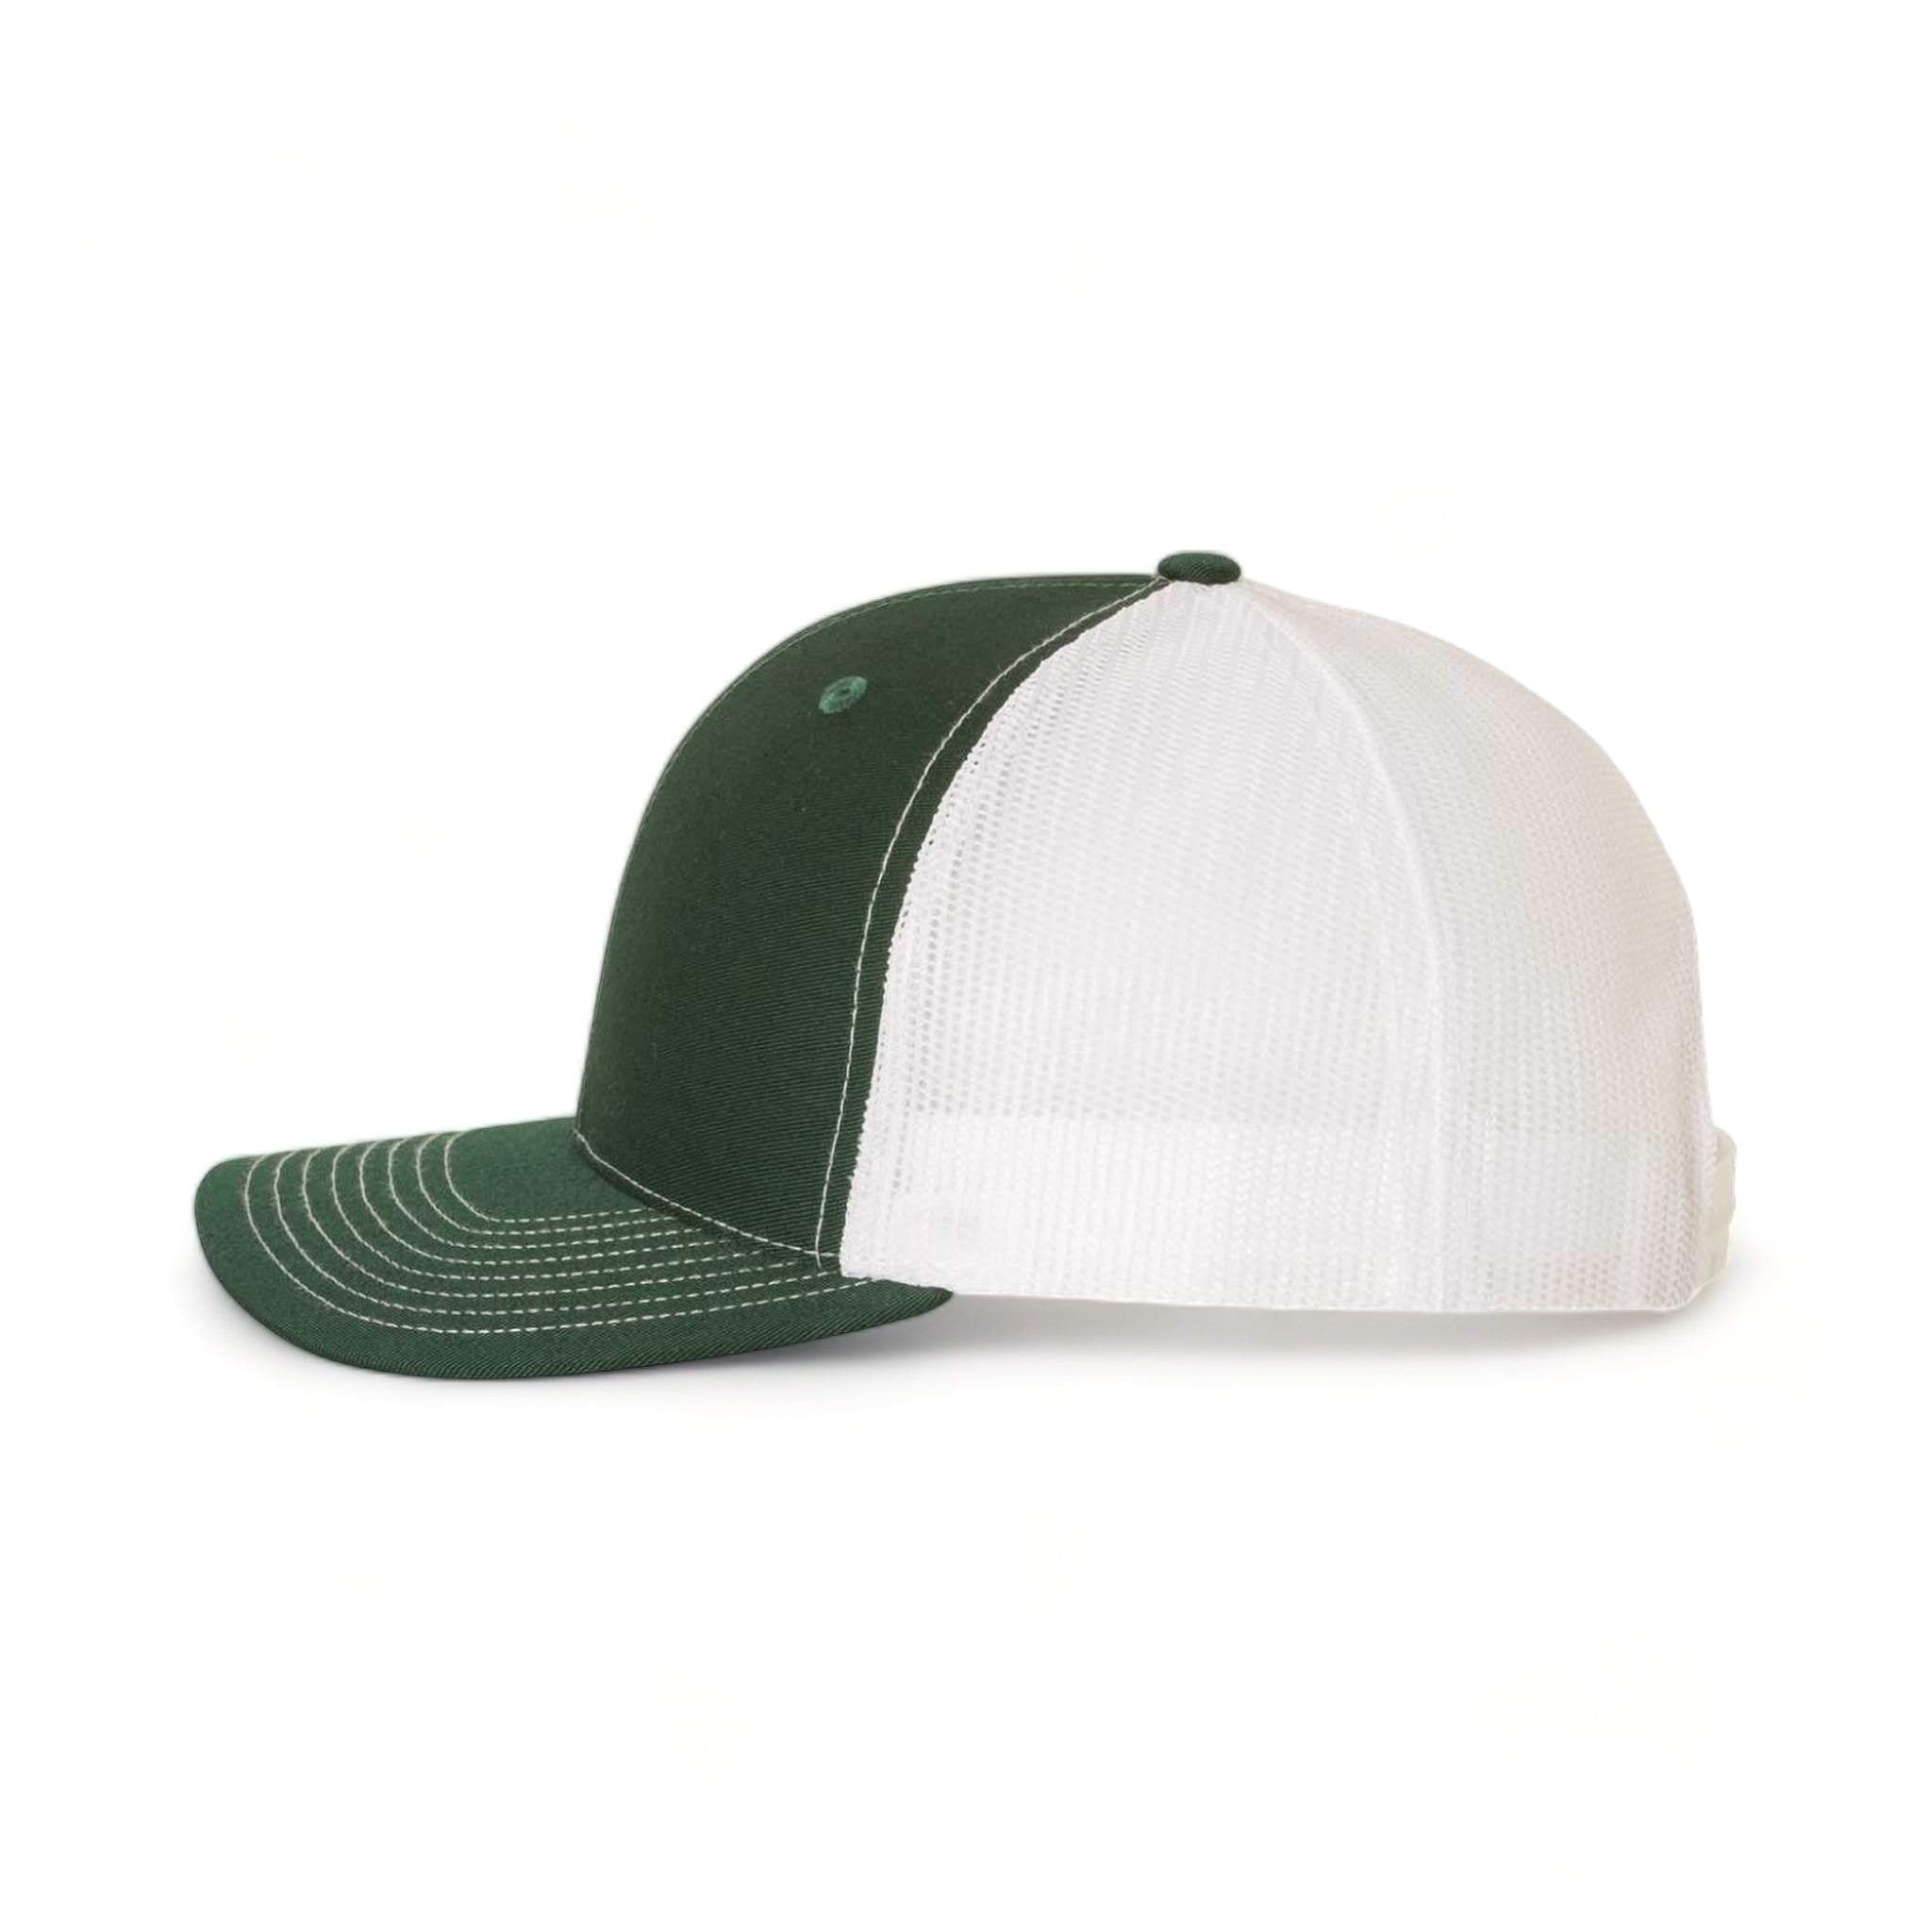 Side view of Richardson 112 custom hat in dark green and white